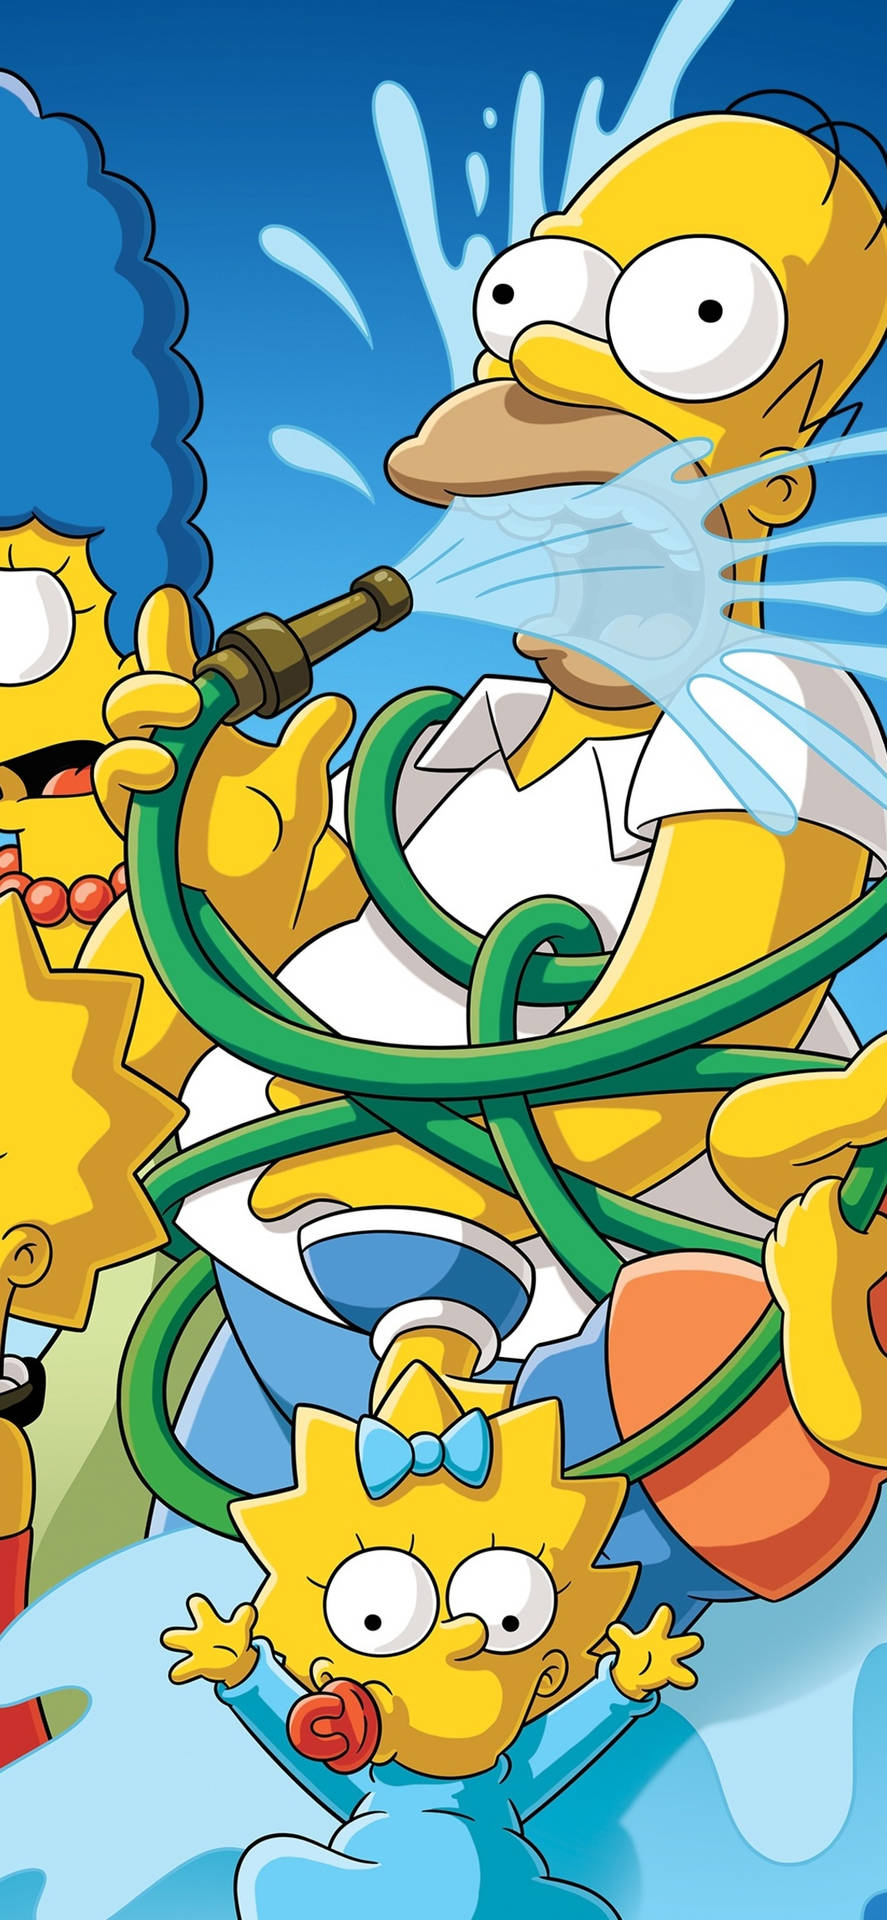 Chaotic Simpsons Family Iphone X Cartoon Background